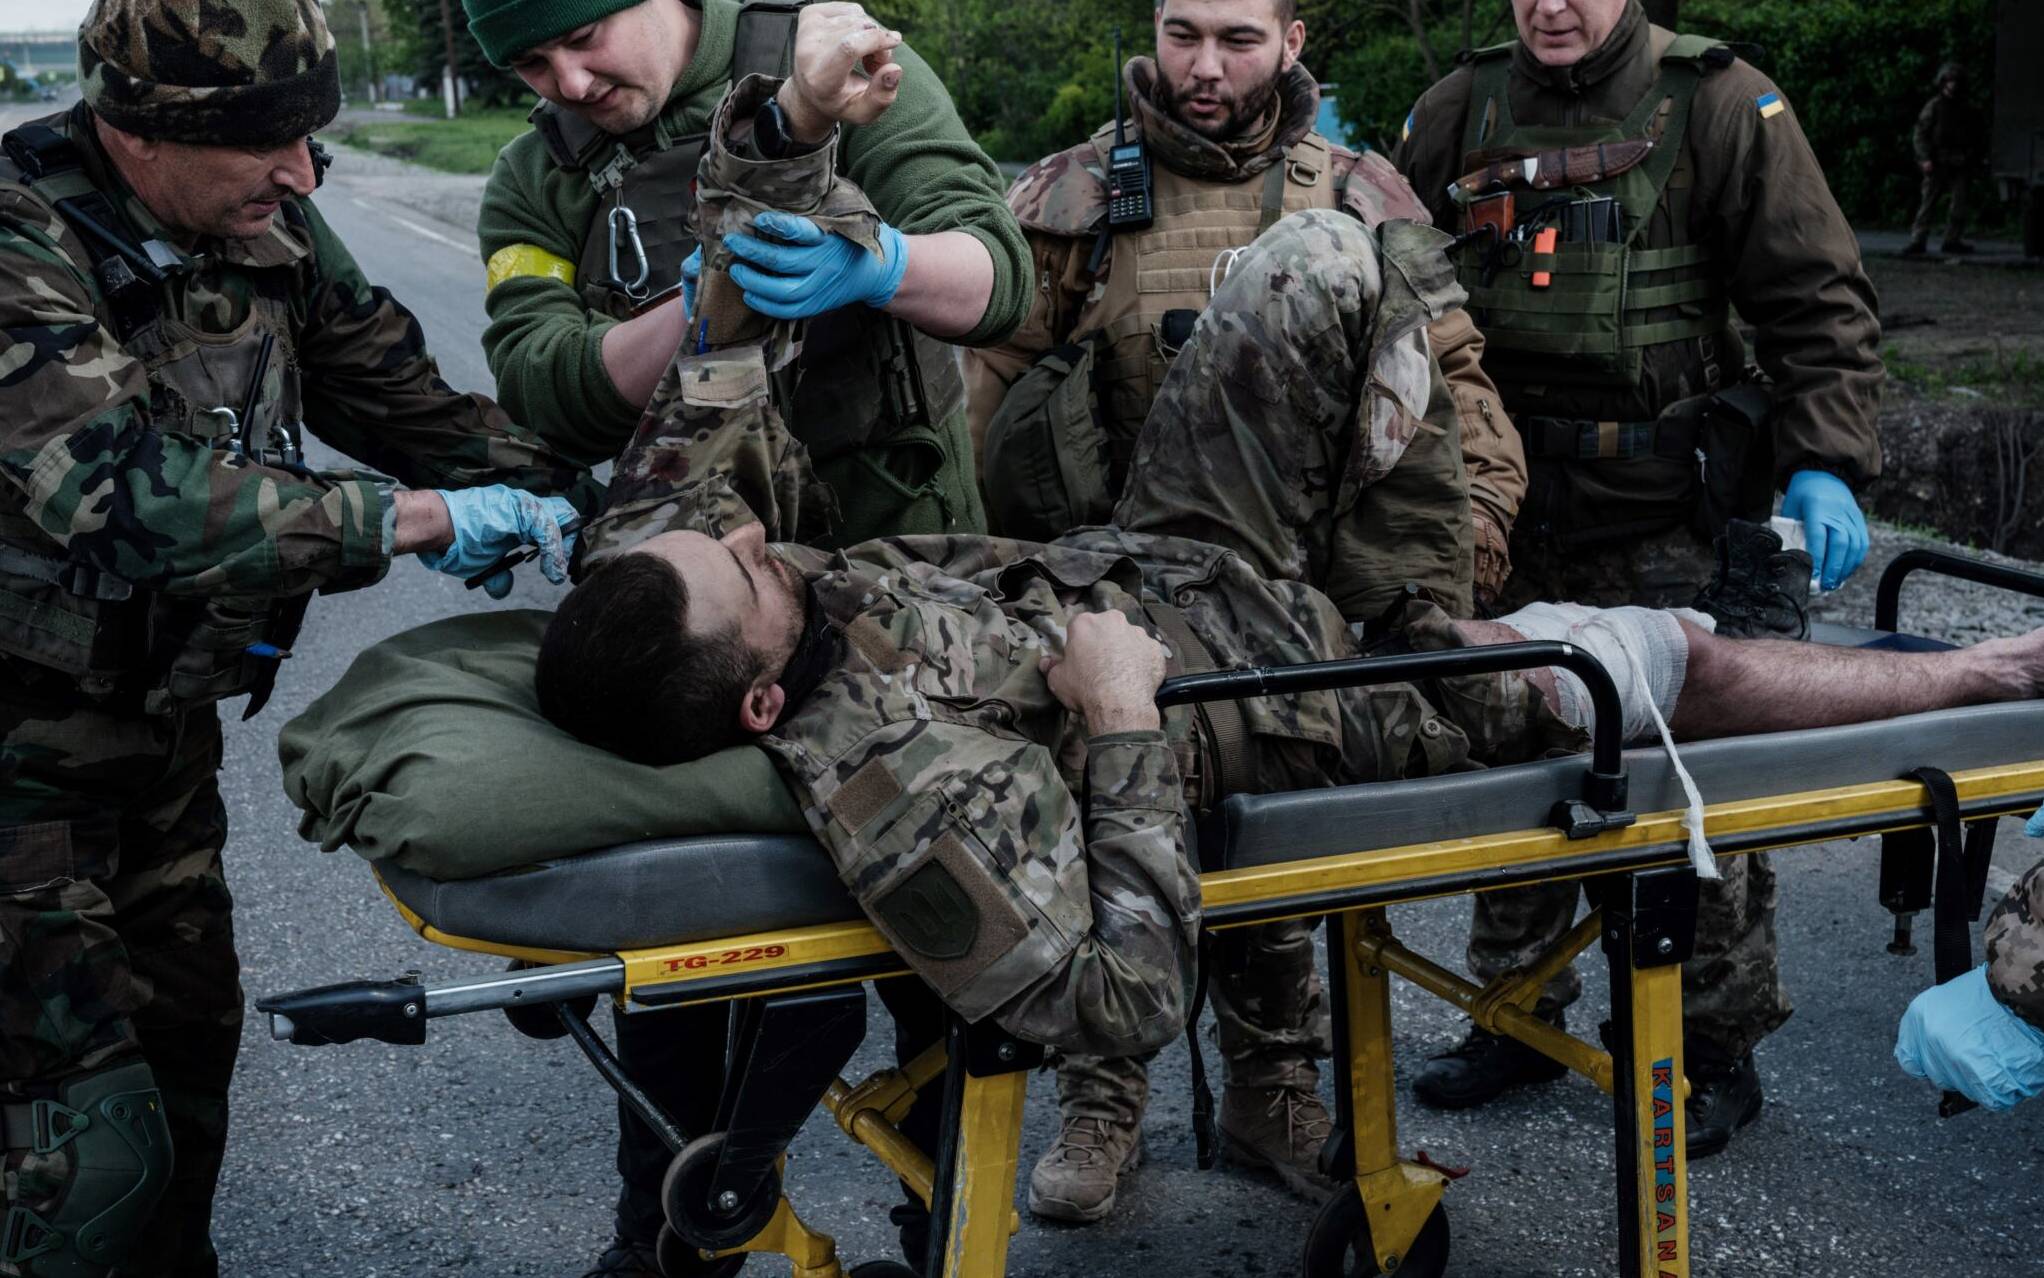 Members of the Ukrainian Army's mobile evacuation unit treat a wounded soldier before his transfer to a hospital by ambulance, on a road near Lysychansk, eastern Ukraine, on May 10, 2022, amid the Russian invasion of Ukraine. (Photo by YASUYOSHI CHIBA / AFP)